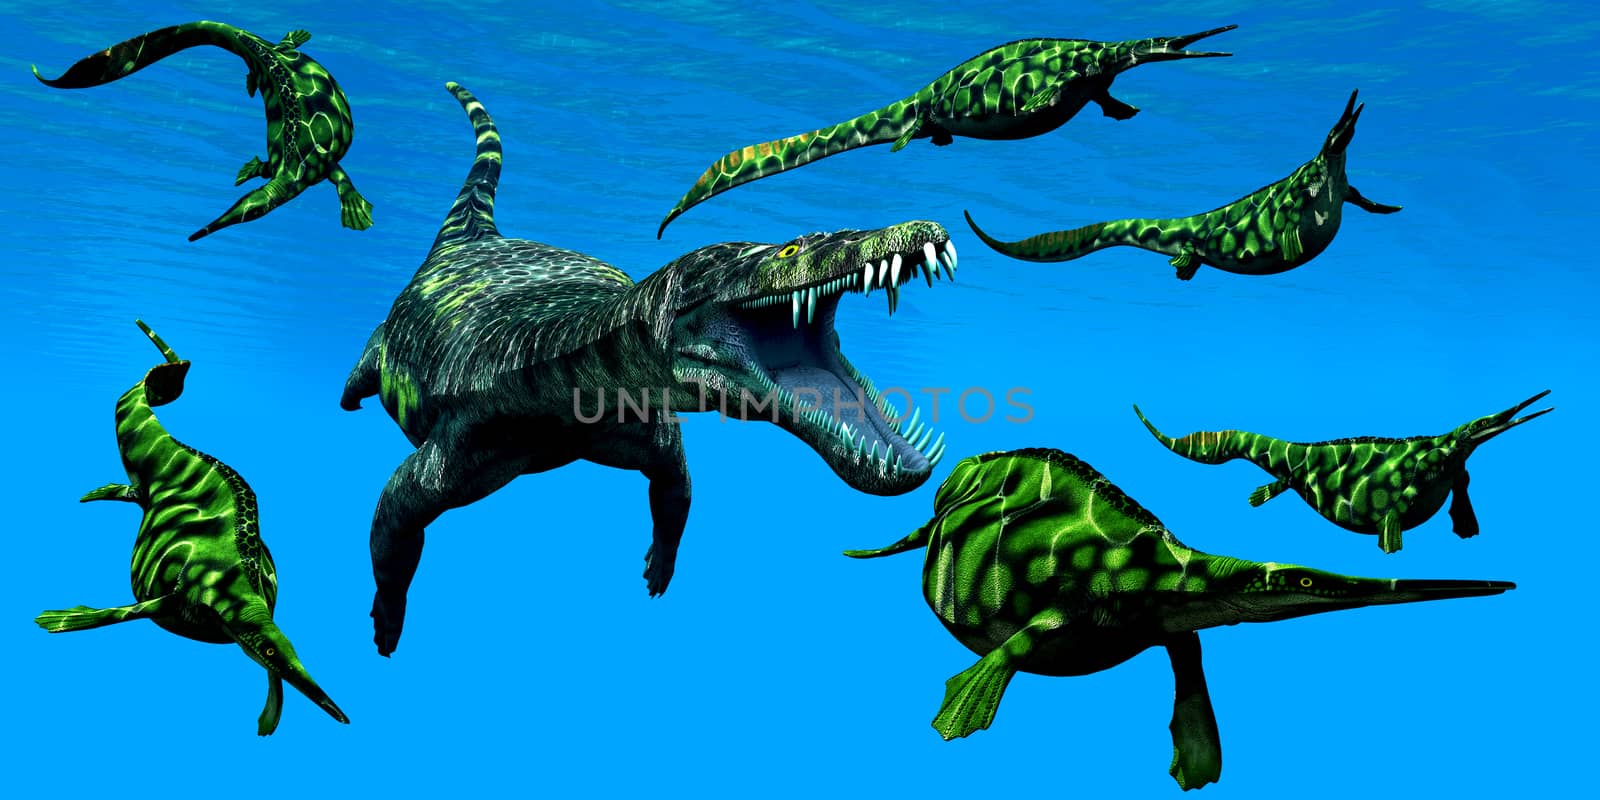 A Nothosaurus marine reptile attacks a pod of Hepehsuchus dinosaurs in a Triassic Ocean.